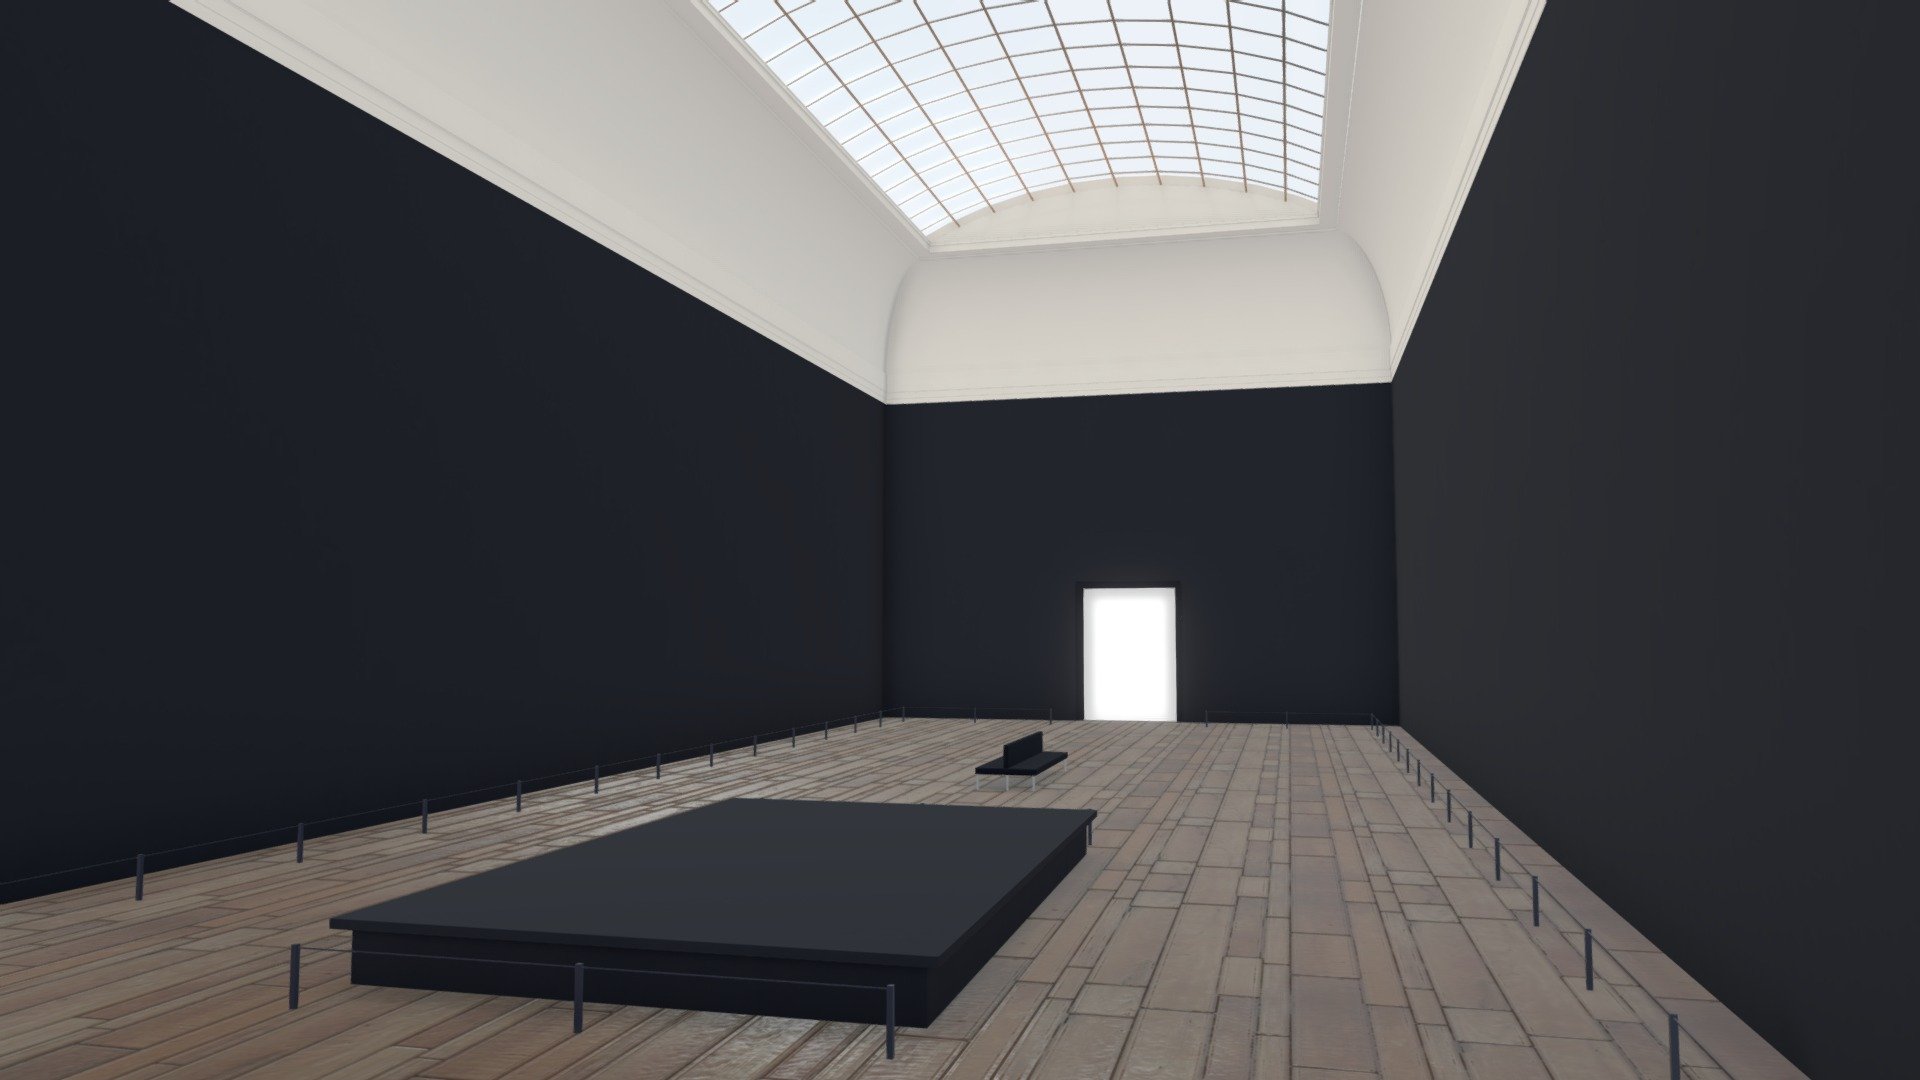 VR Gallery interior made for Product Showcase, scene has got baked in lighting.
UVs Ready.
Ambient Occlusion and Lighting with Blender.
FBX file size : 244KB

Click on the link to see more models : https://sketchfab.com/GbehnamG/store

If you need customized 3d models , feel free to contact at: mr.gbehnamg@yahoo.com - VR Gallery for Product Showcase 2021 - Buy Royalty Free 3D model by BehNaM (@GbehnamG) 3d model